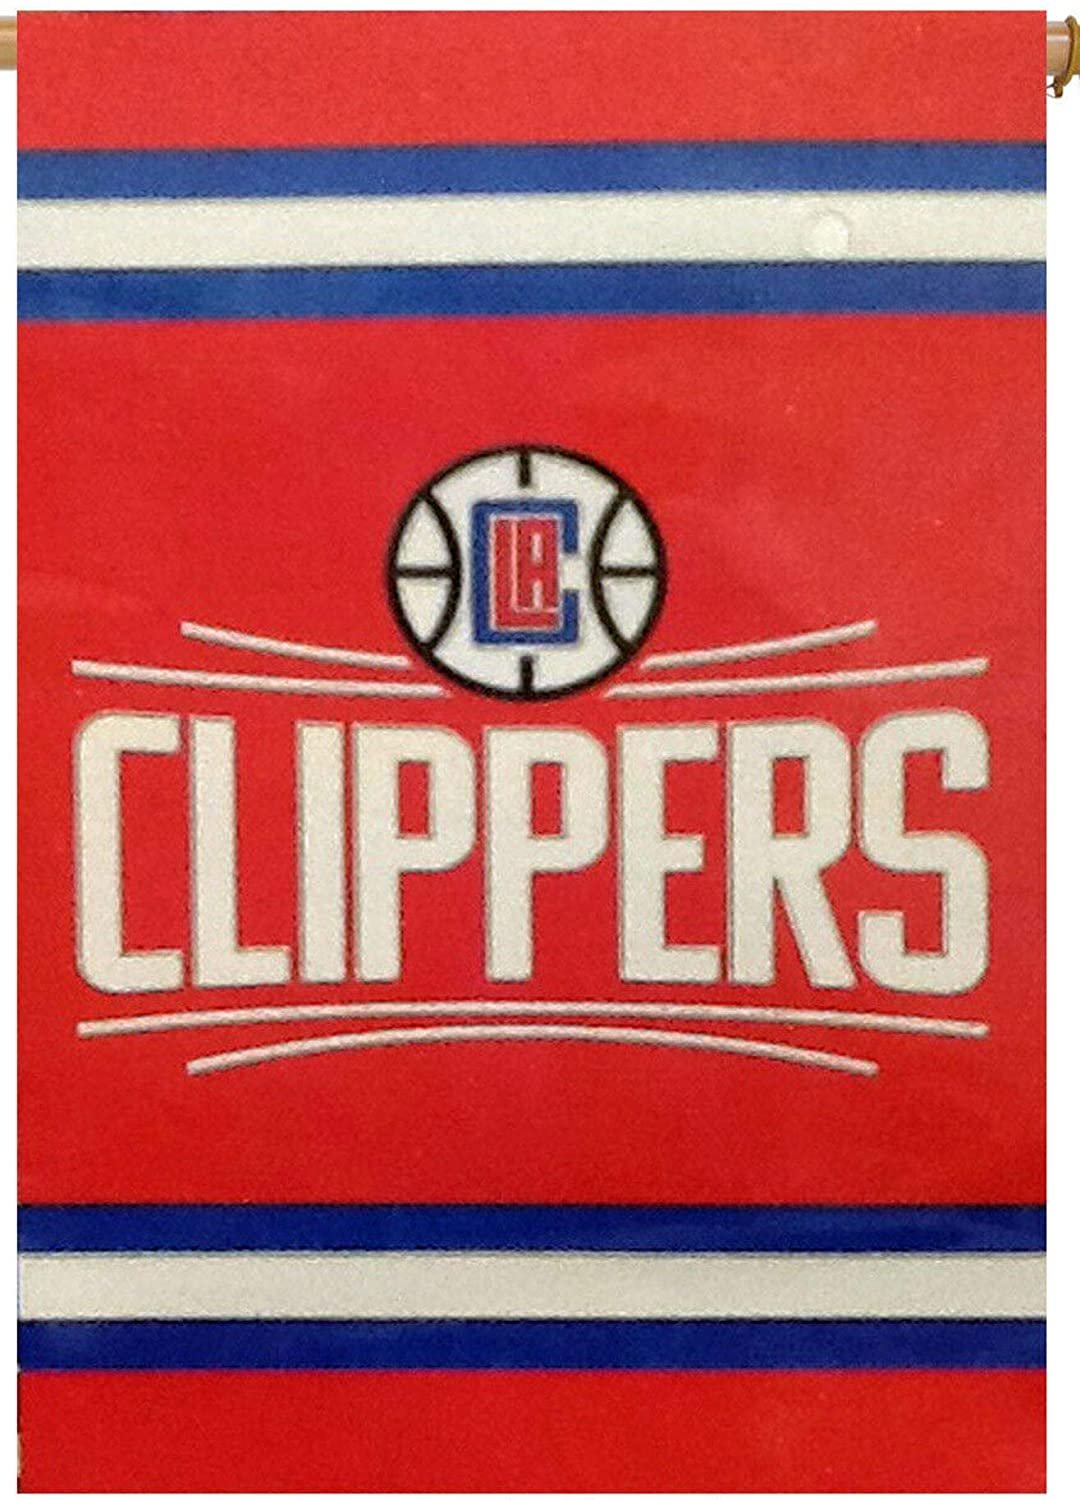 Los Angeles Clippers New Logo 2-Sided 28x44 Banner Applique Embroidered Flag